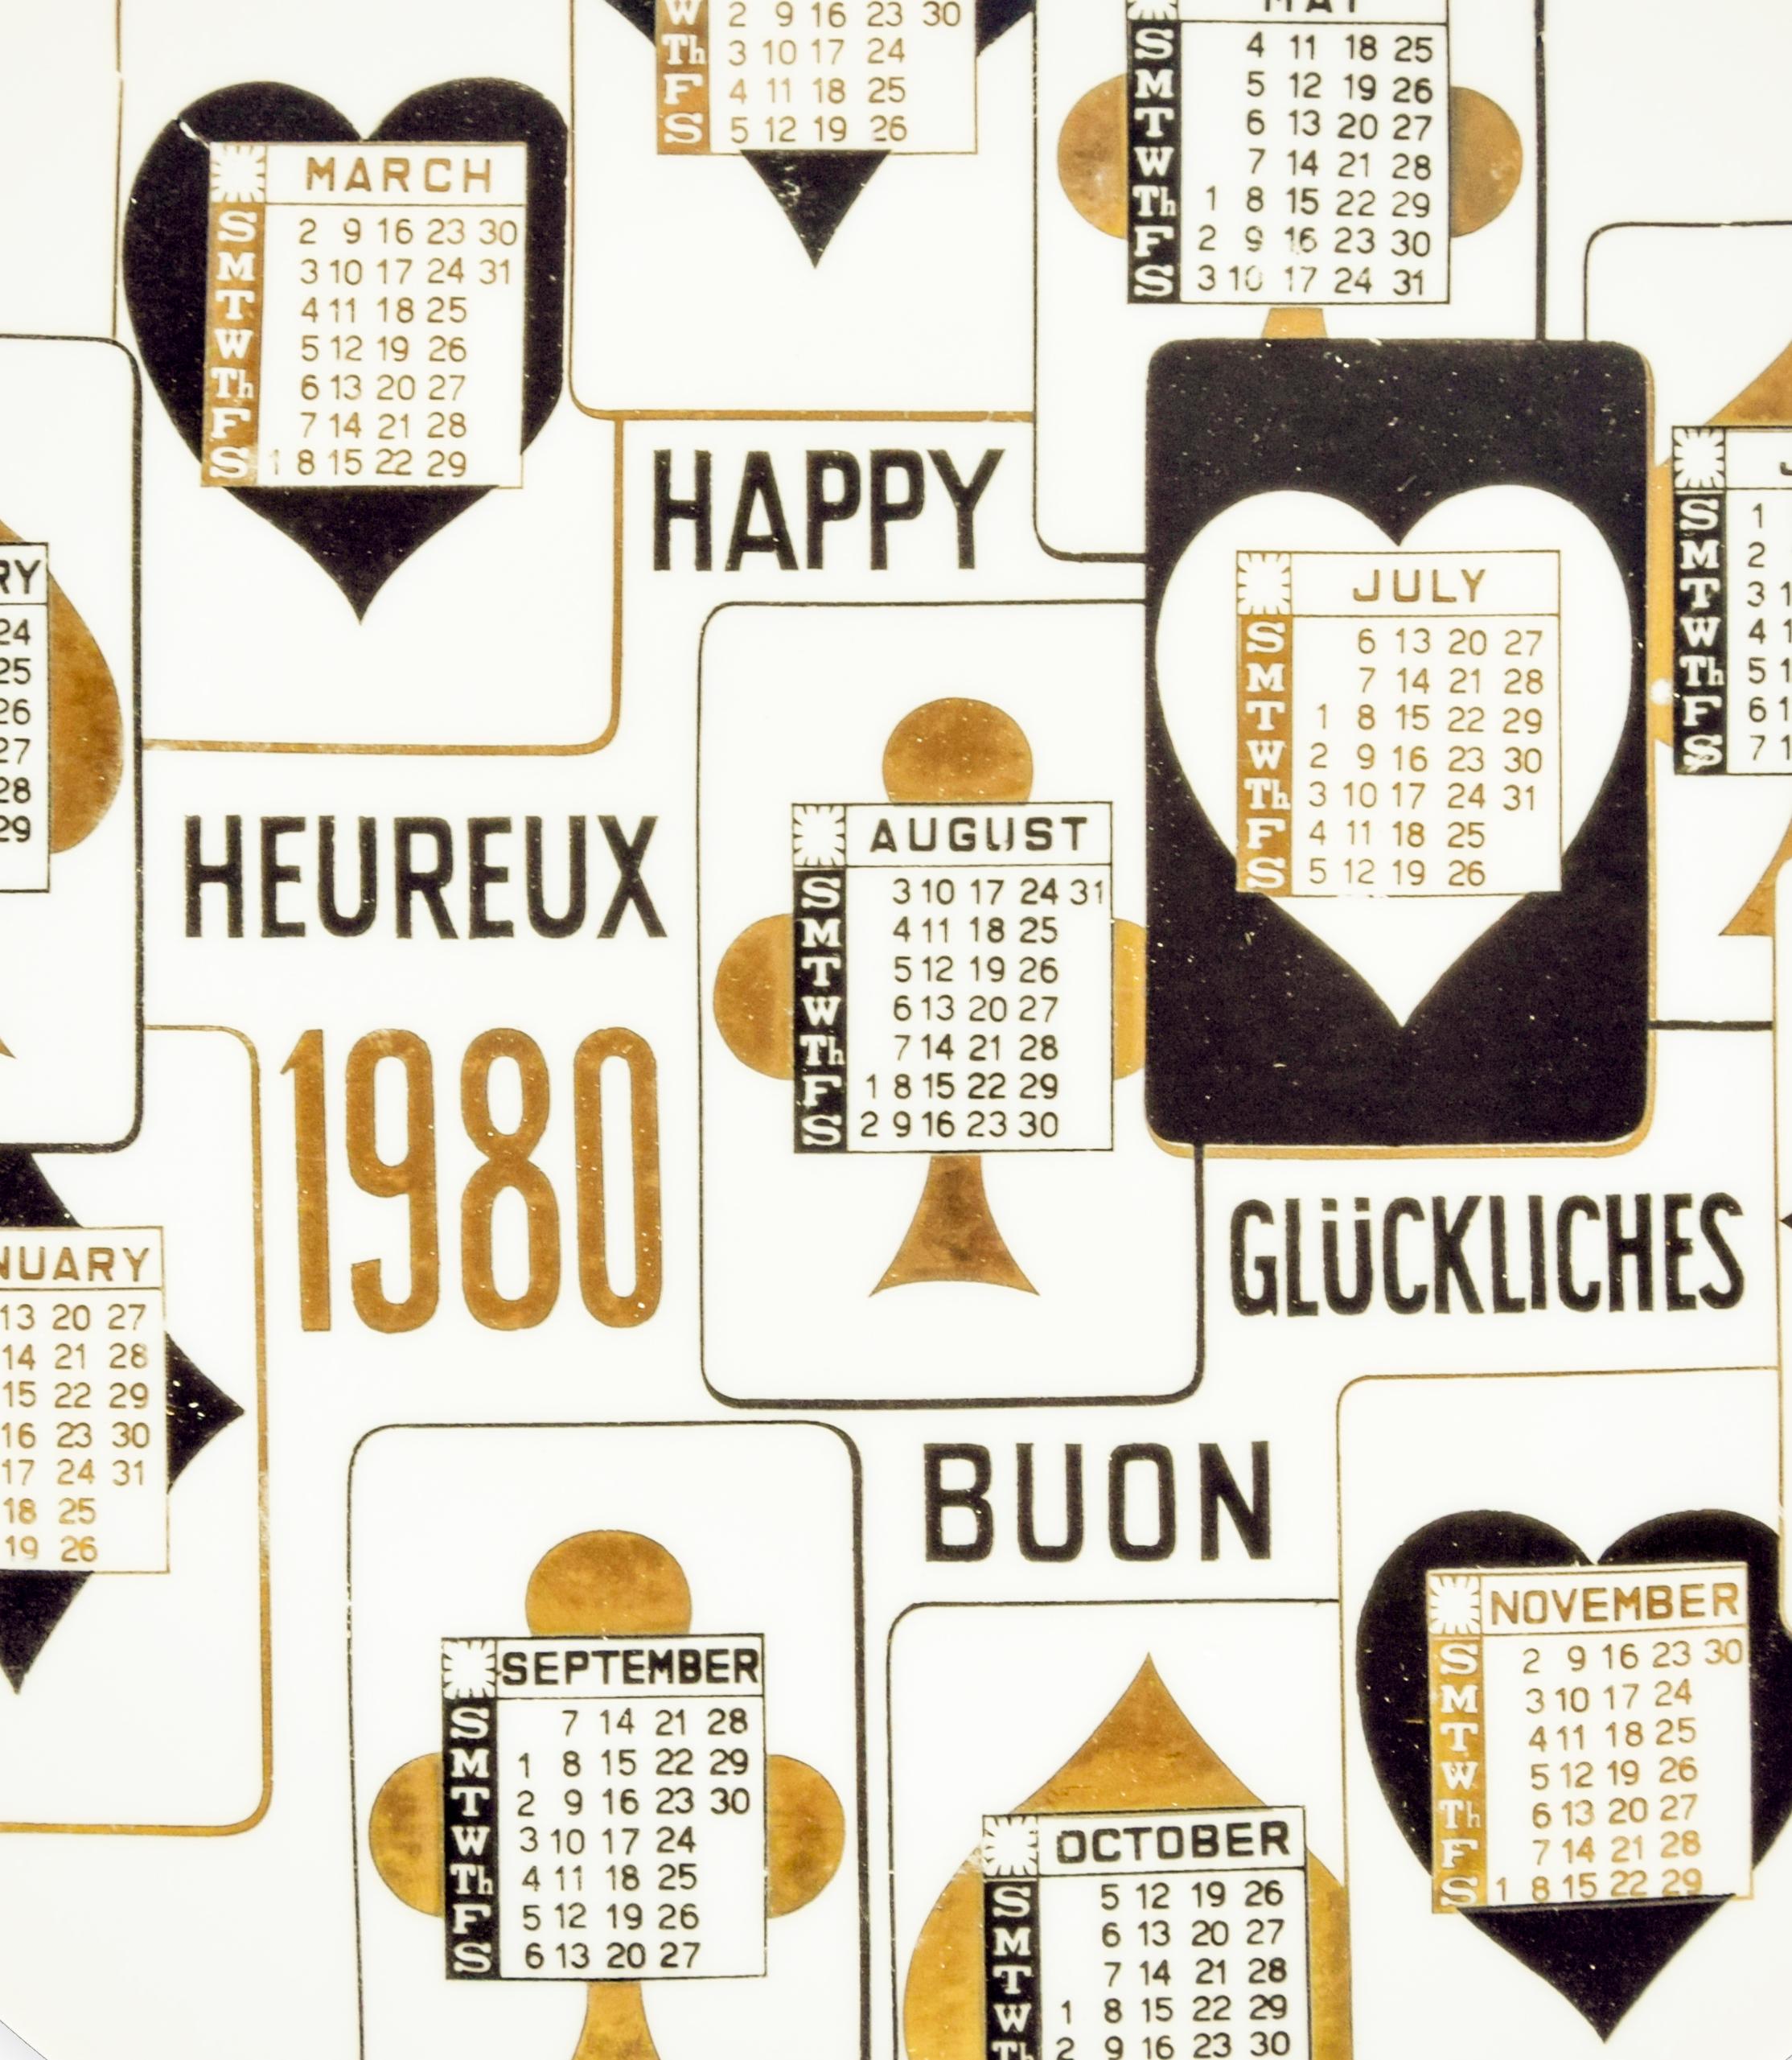 Buon 1980 Calendario is a silk-screened porcelain plate, designed by Piero Fornasetti in 1980 from the Calendario series, the Happy New Year dishes series. 

Very good conditions.

Black and white ceramic Fornasetti wall plate, illustrated with